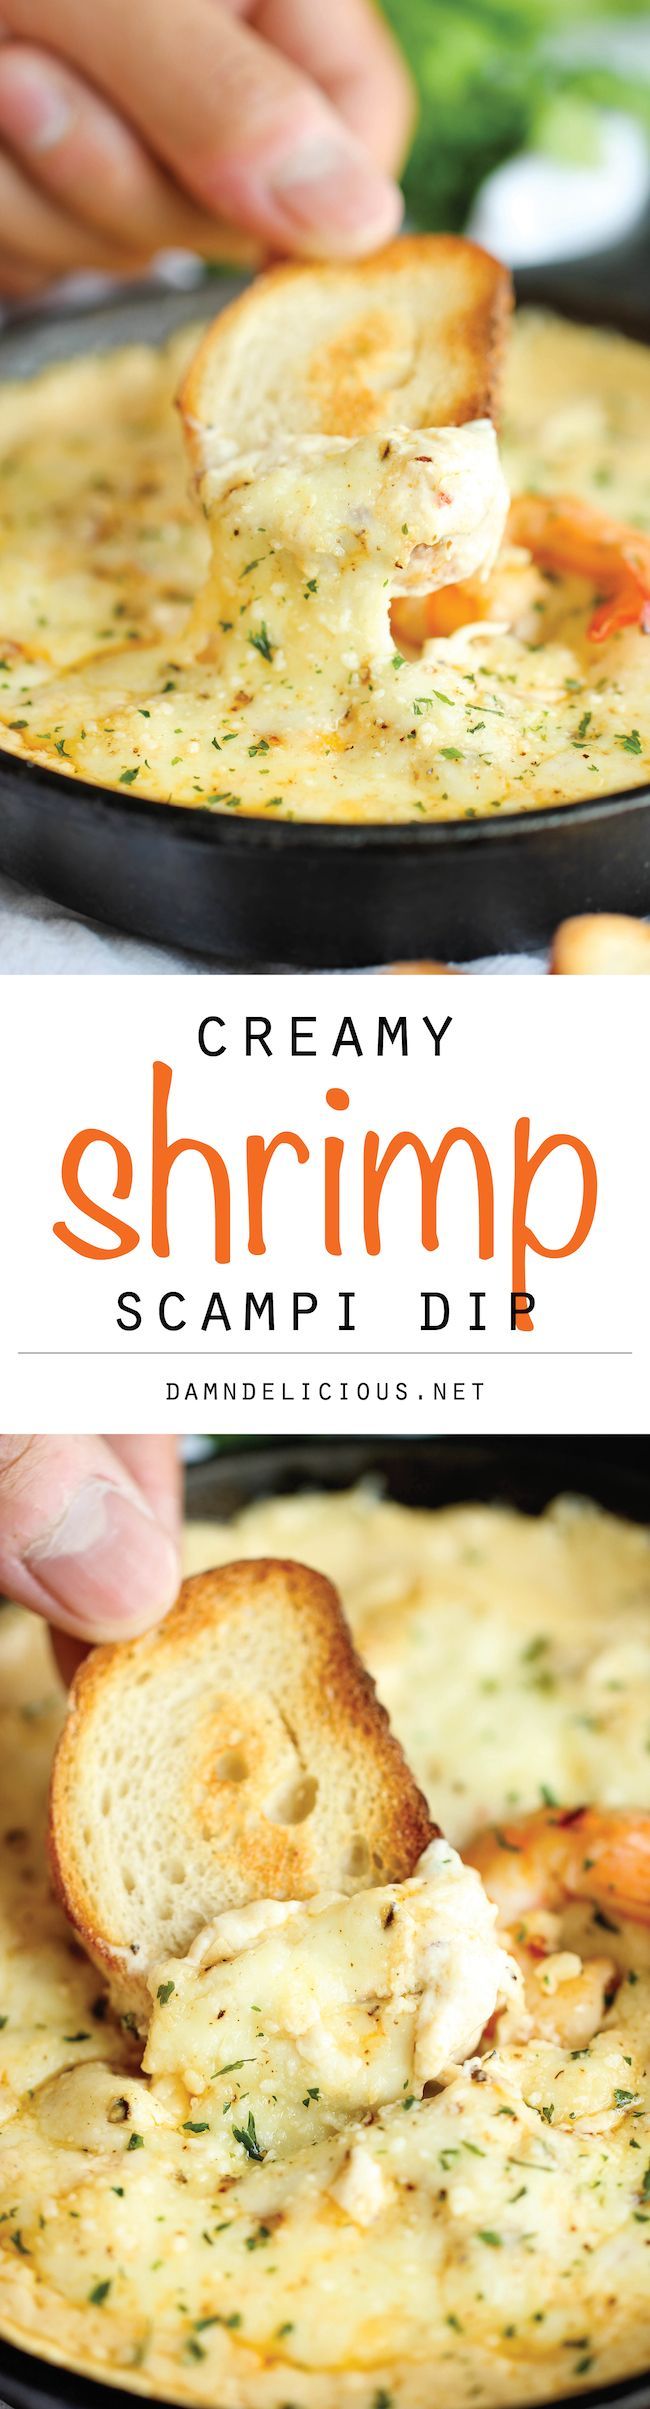 Shrimp Scampi Dip – One of the best (and easiest) dips I’ve ever had, baked to absolute creamy, cheesy perfection!